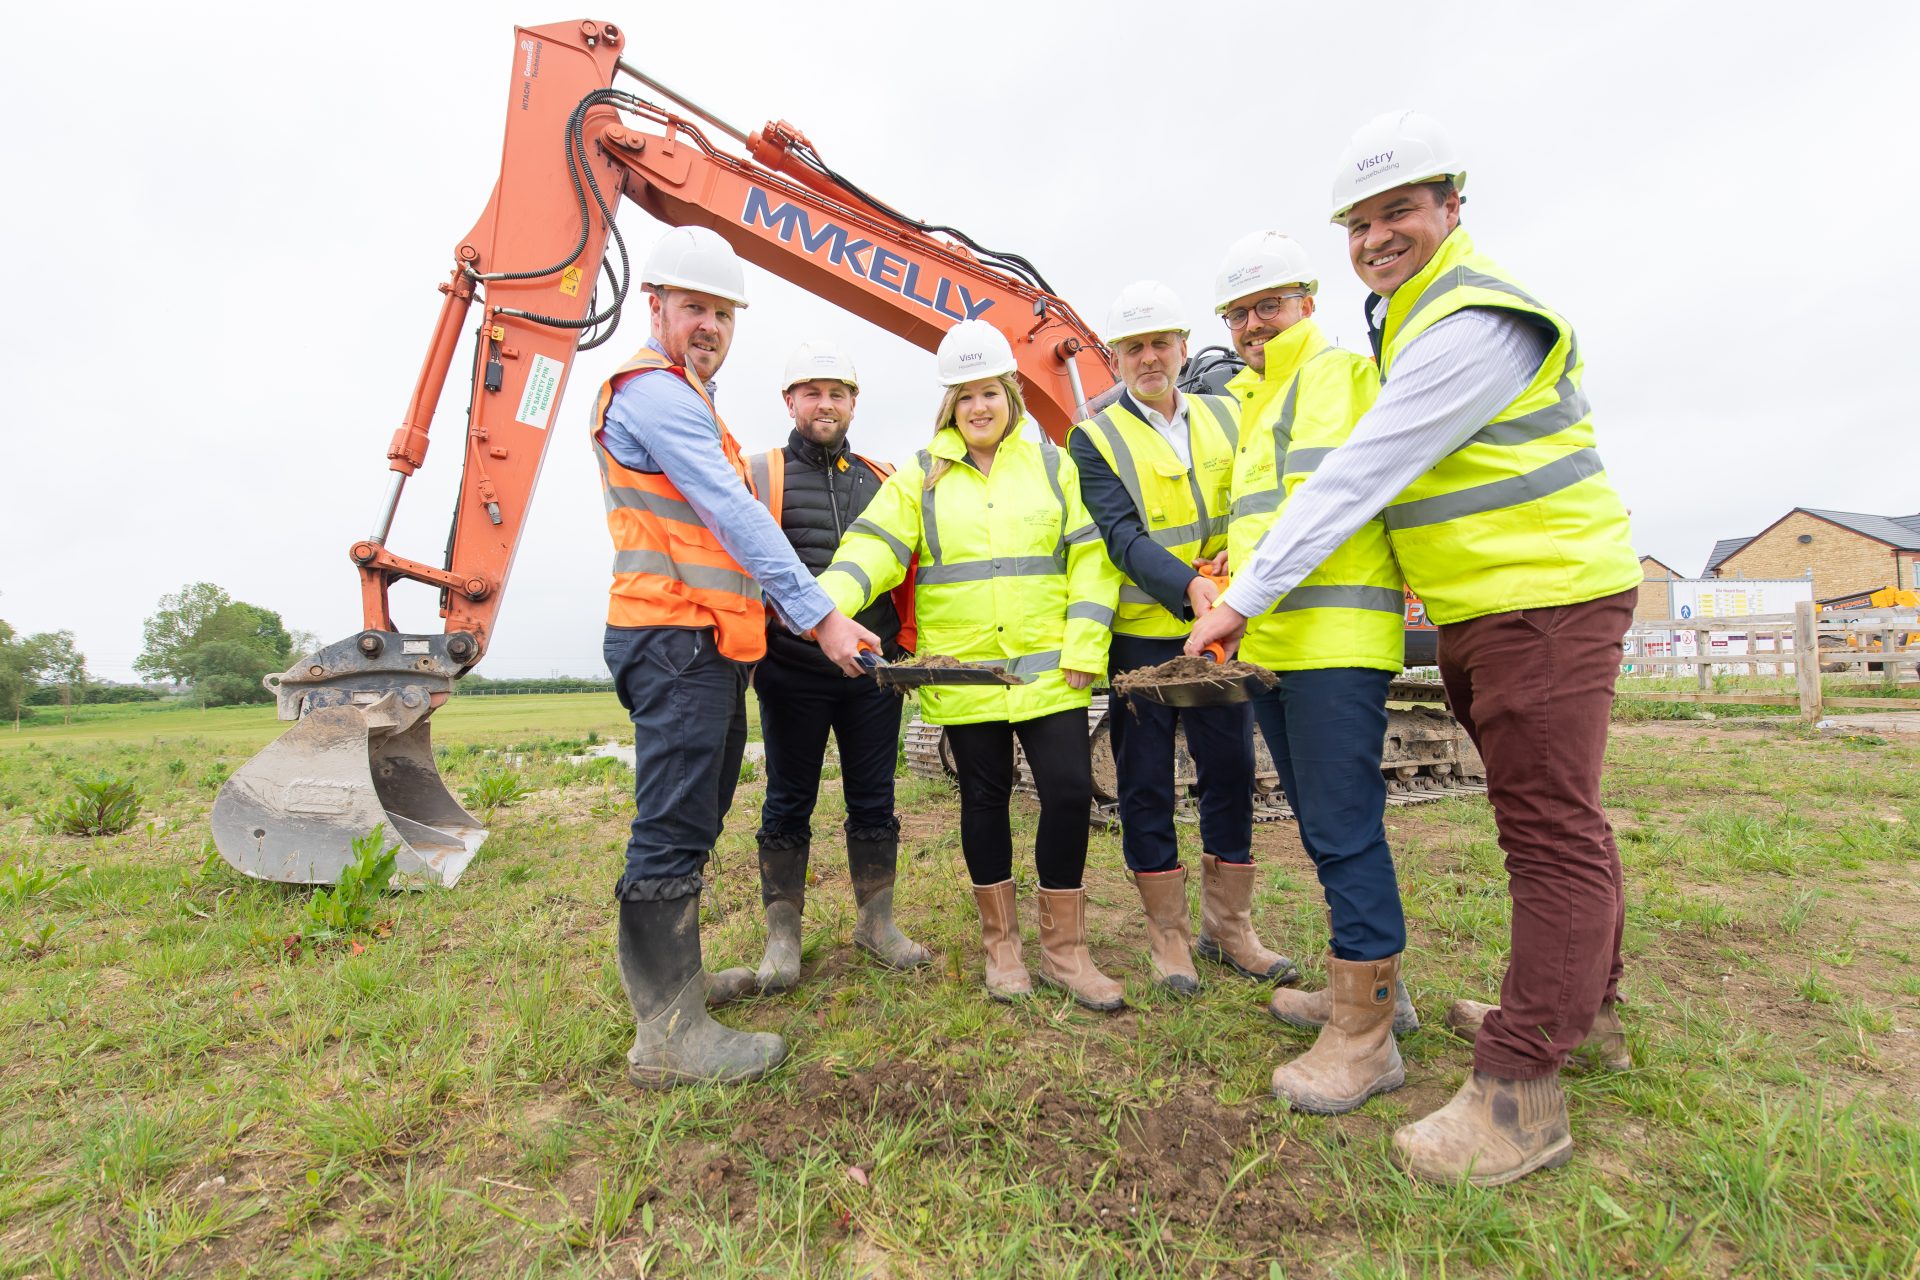 Vistry Cotswolds Twigworth Green Groundbreaking event (19)